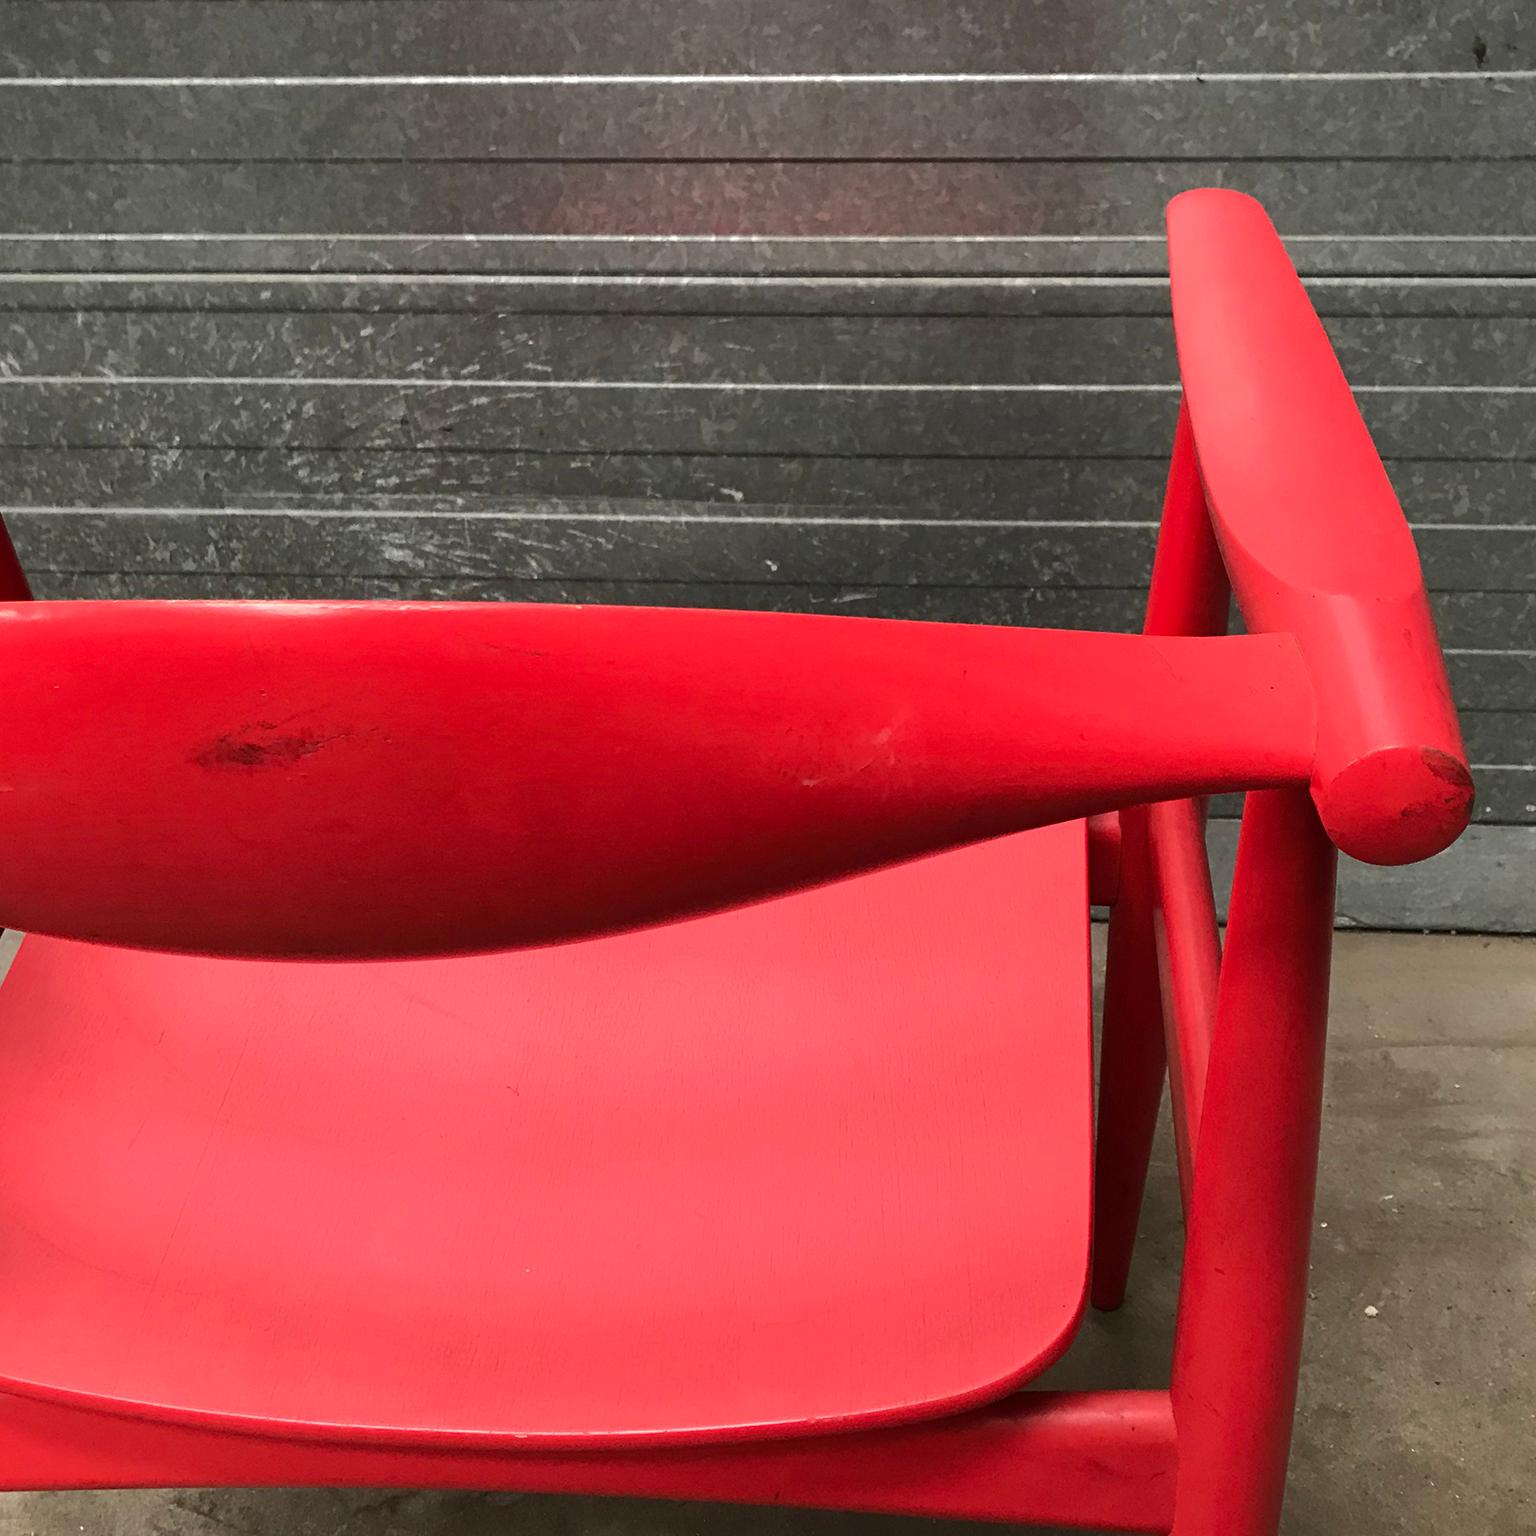 Very Rare Wegner Side Chair in Originally Red Painted Wood, circa 1930 For Sale 10